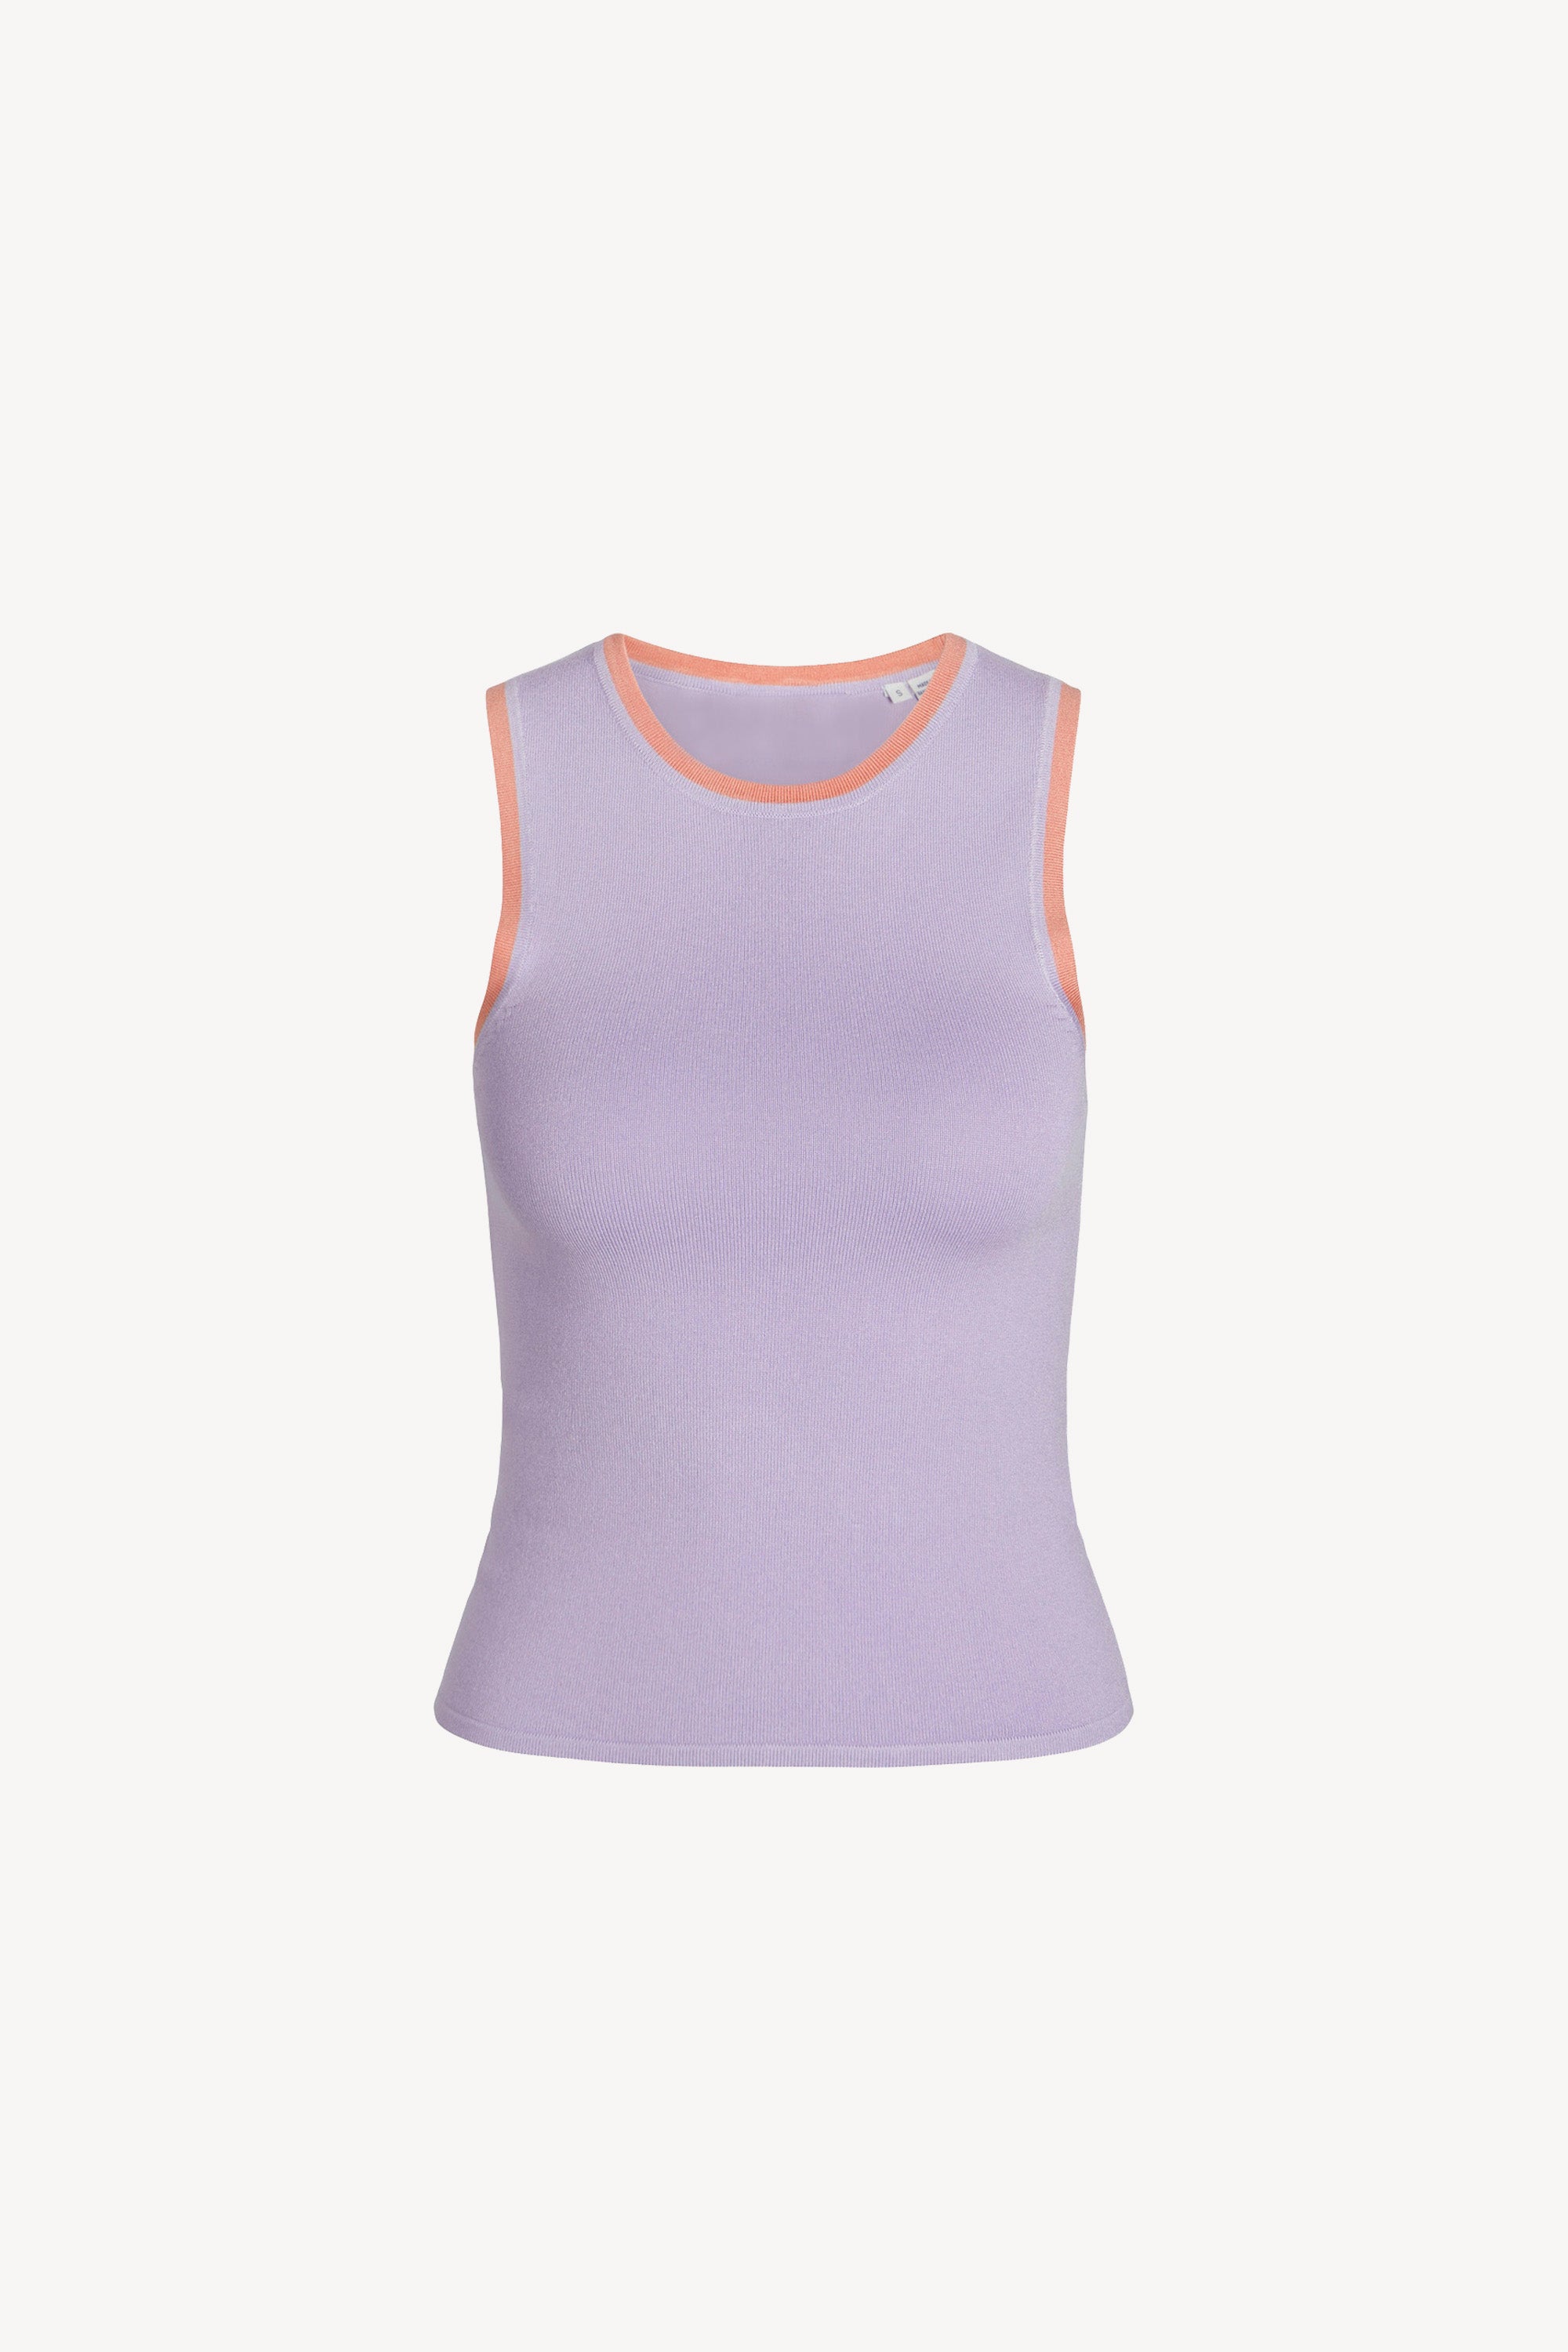 Evelyn Top Knit Lilac Breeze /Burnt Coral